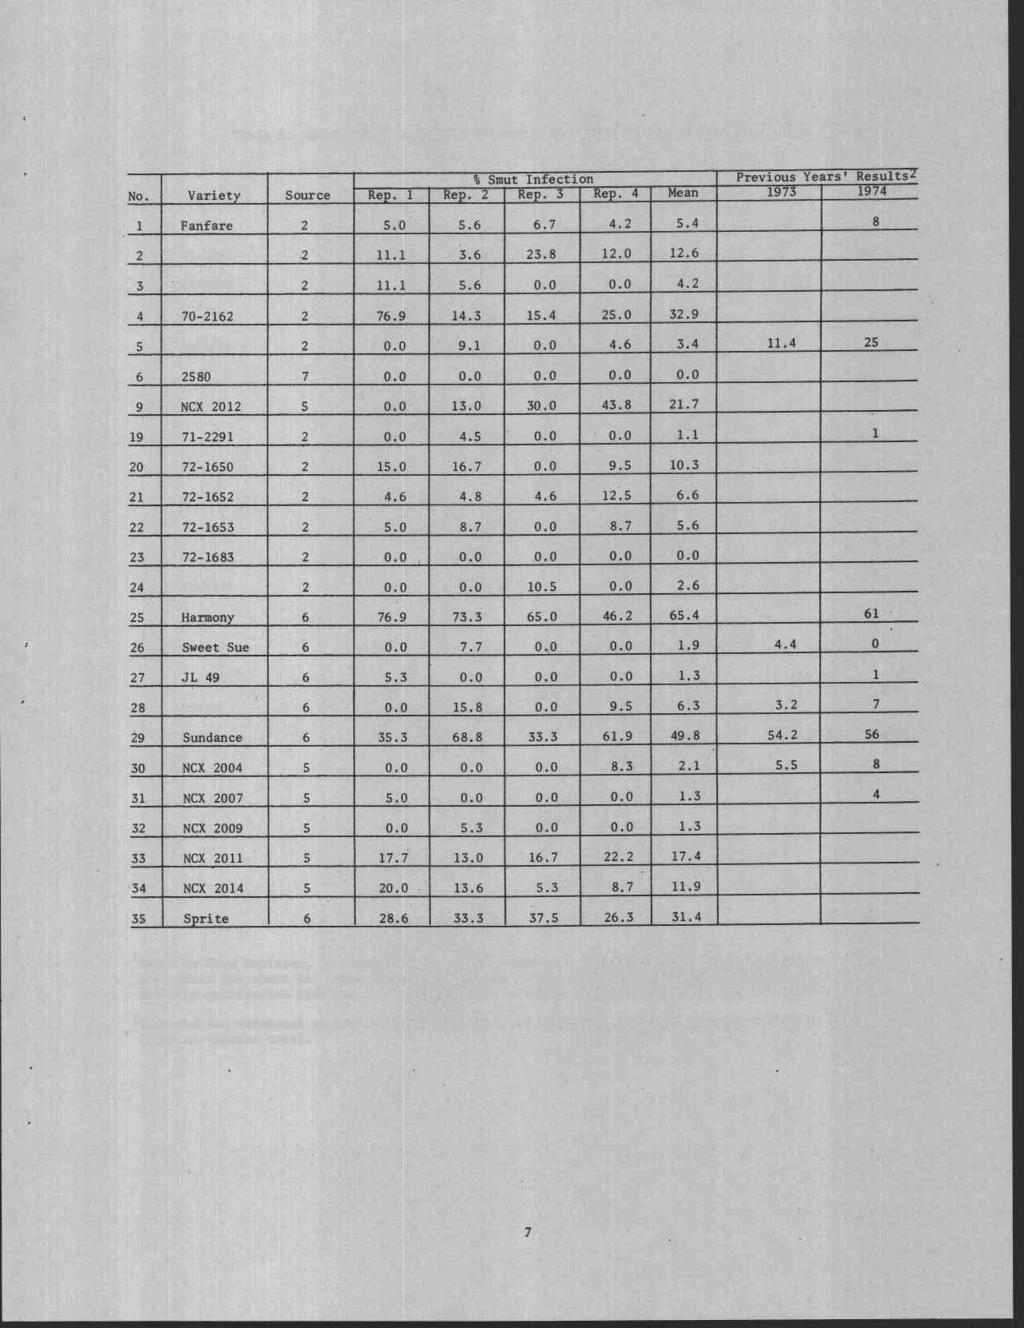 Table 5. Head Smut Resistance of Sweet Corn Varieties at Scio, Oregon, 19751 No. Variety Source % Smut Infection Previous Years' Results2 Rep. 1 Rep. 2 Rep. Rep. 4 Mean 1973 1974 1 Fanfare 2 5.0 5.